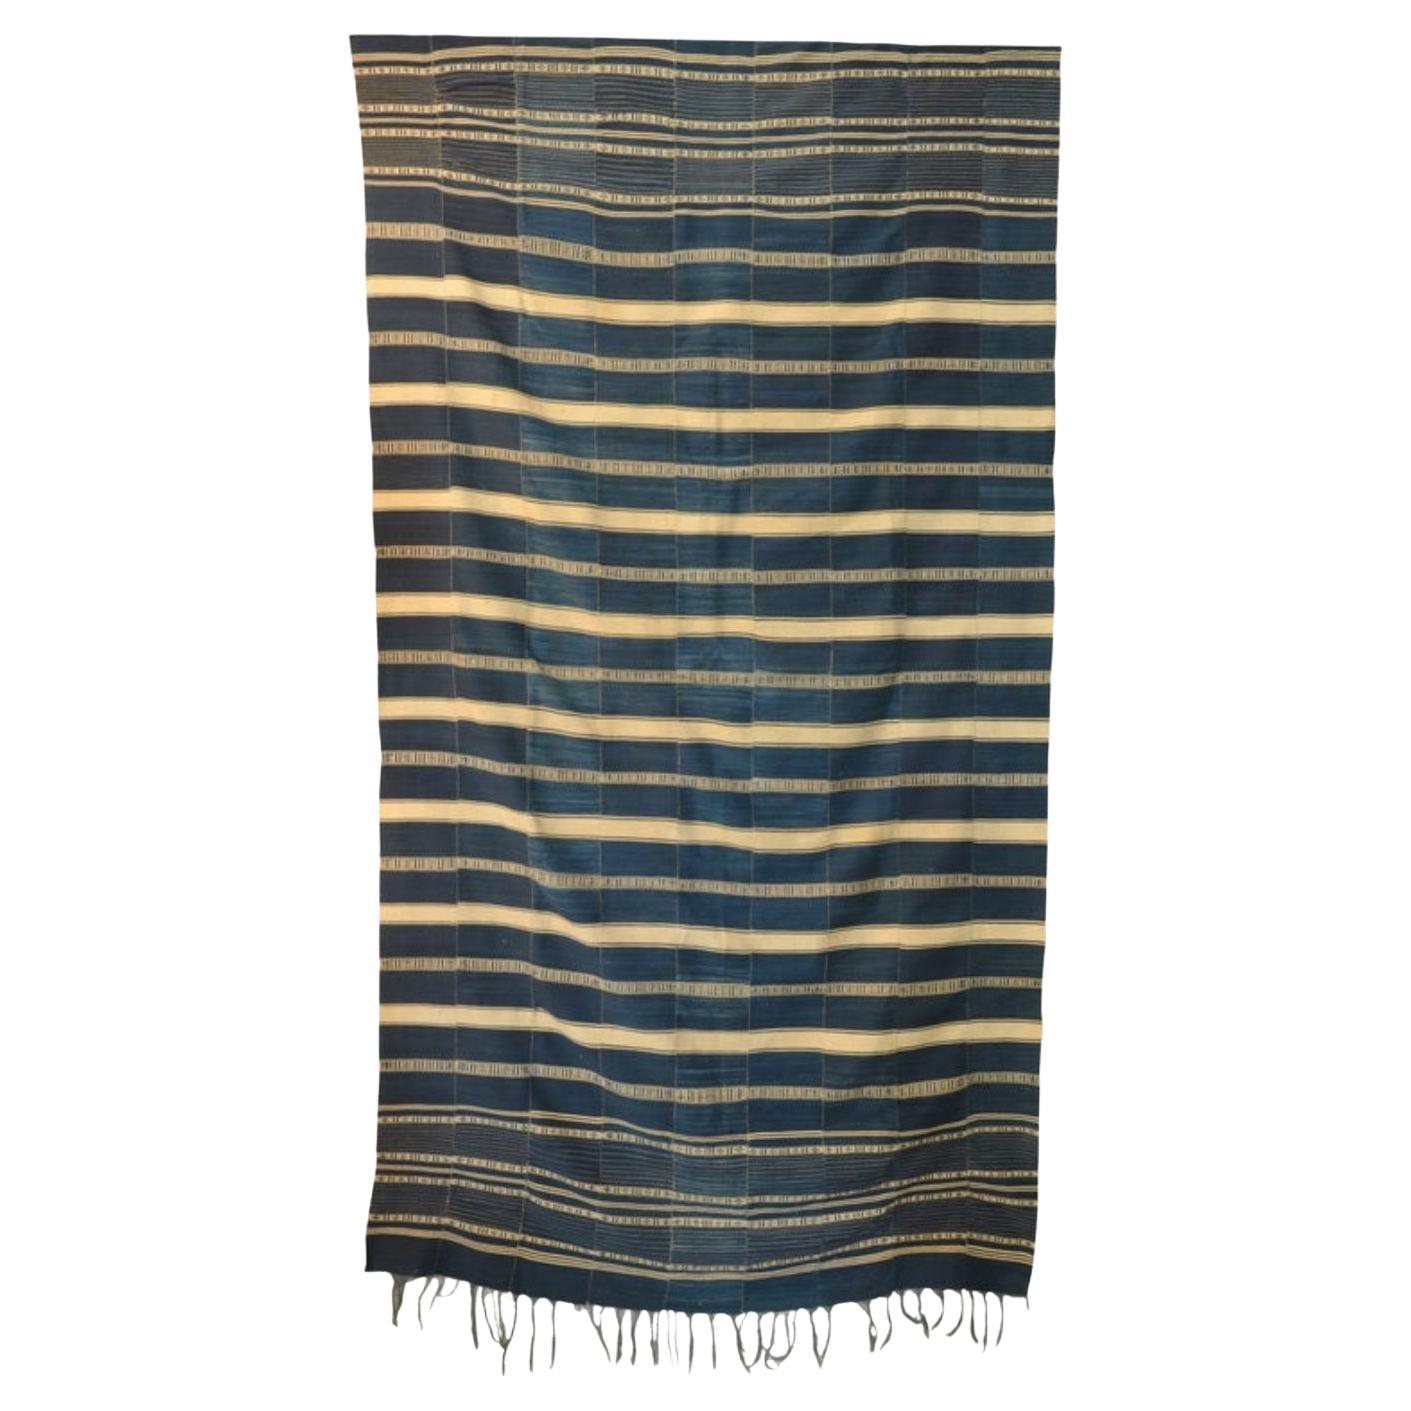 Museum Quality West African Indigo Textile For Sale